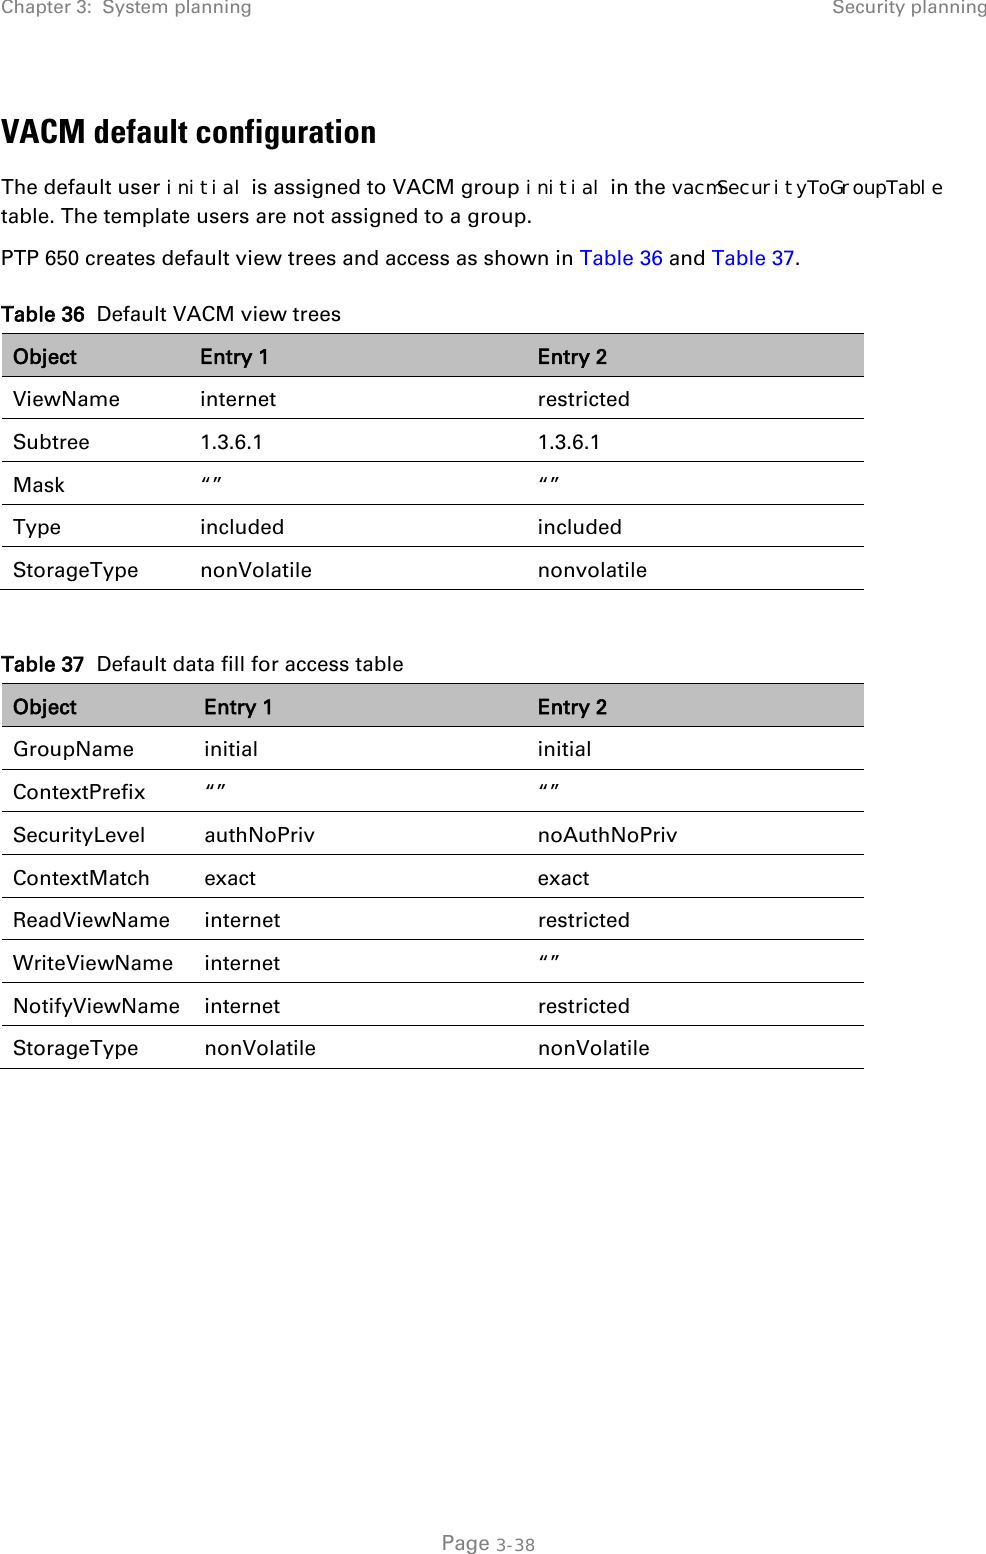 Chapter 3:  System planning Security planning  VACM default configuration The default user initial is assigned to VACM group initial in the vacmSecurityToGroupTable table. The template users are not assigned to a group. PTP 650 creates default view trees and access as shown in Table 36 and Table 37. Table 36  Default VACM view trees Object Entry 1 Entry 2 ViewName internet restricted Subtree 1.3.6.1 1.3.6.1 Mask “” “” Type included included StorageType nonVolatile nonvolatile  Table 37  Default data fill for access table Object Entry 1 Entry 2 GroupName initial initial ContextPrefix “” “” SecurityLevel authNoPriv noAuthNoPriv ContextMatch exact exact ReadViewName internet restricted WriteViewName internet “” NotifyViewName internet restricted StorageType nonVolatile nonVolatile   Page 3-38 